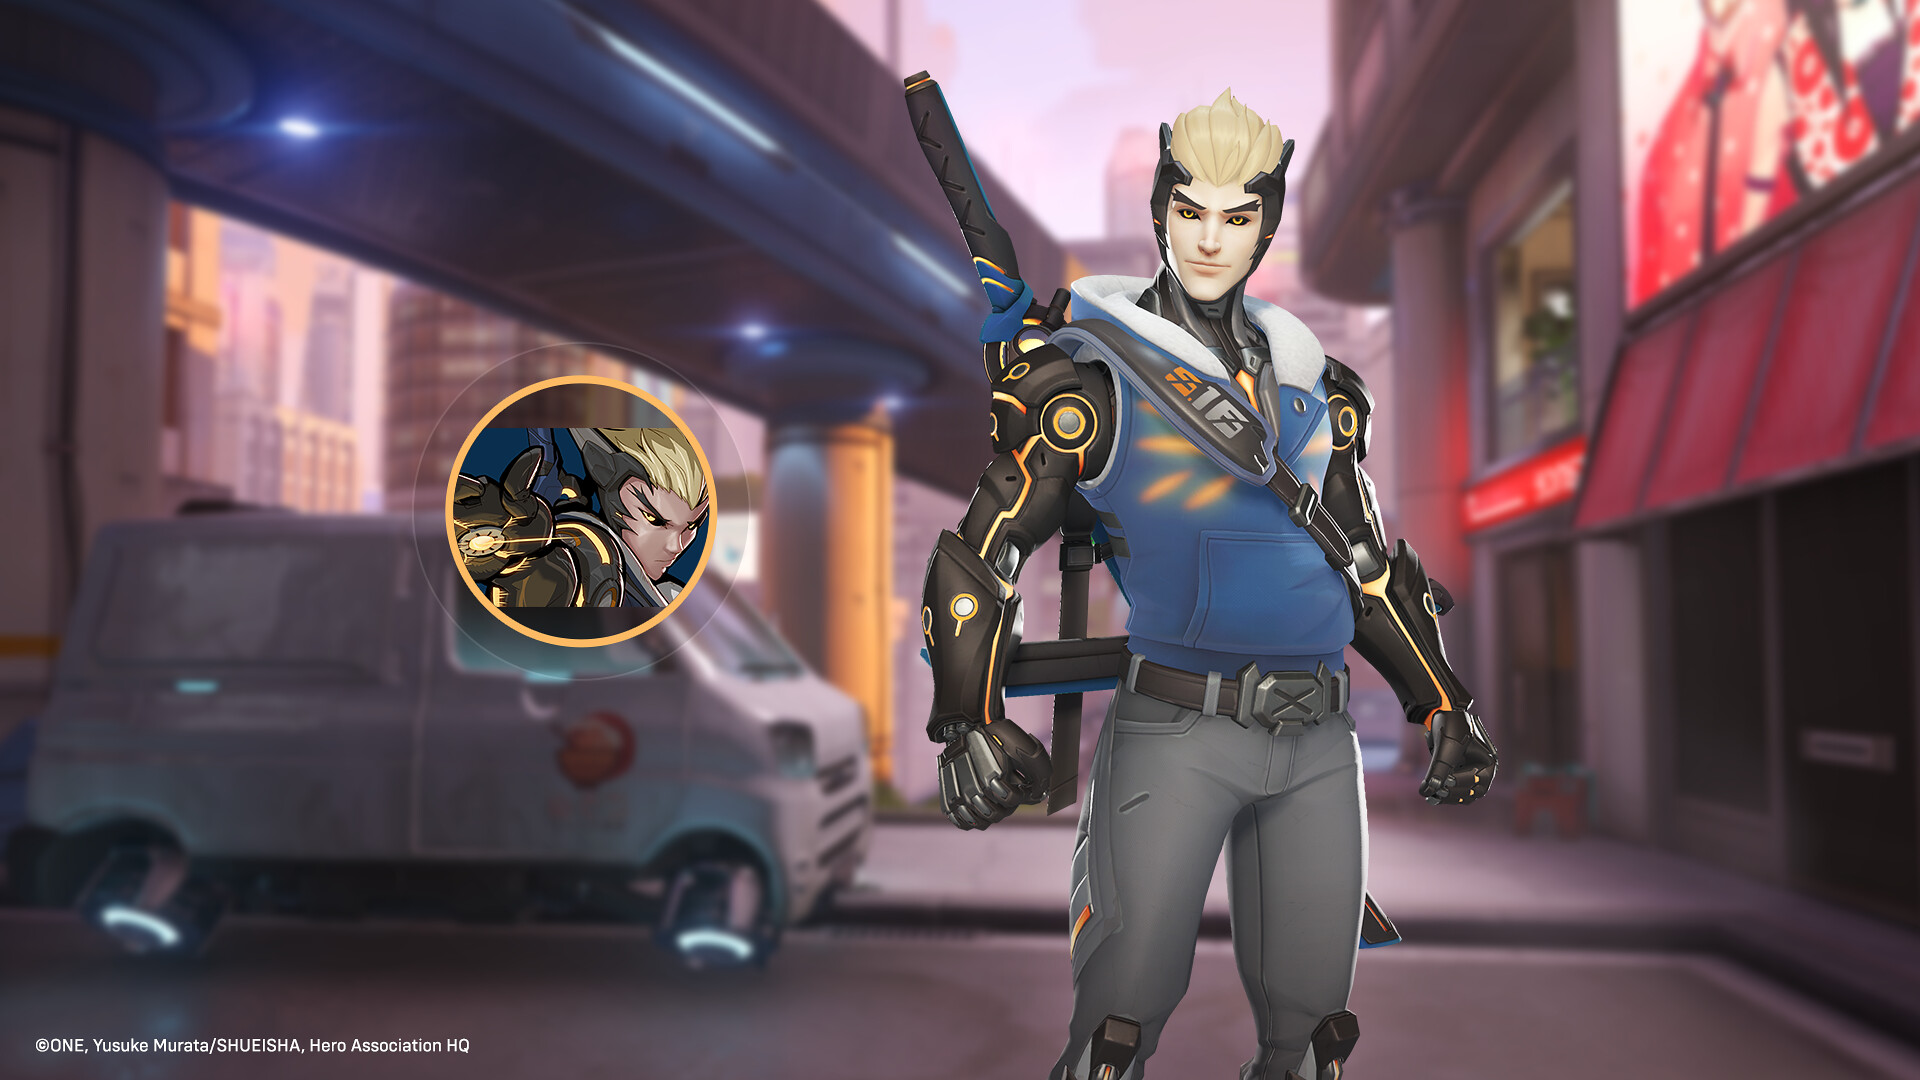 How to get One Punch Man skins in Overwatch 2: Everything you need to know